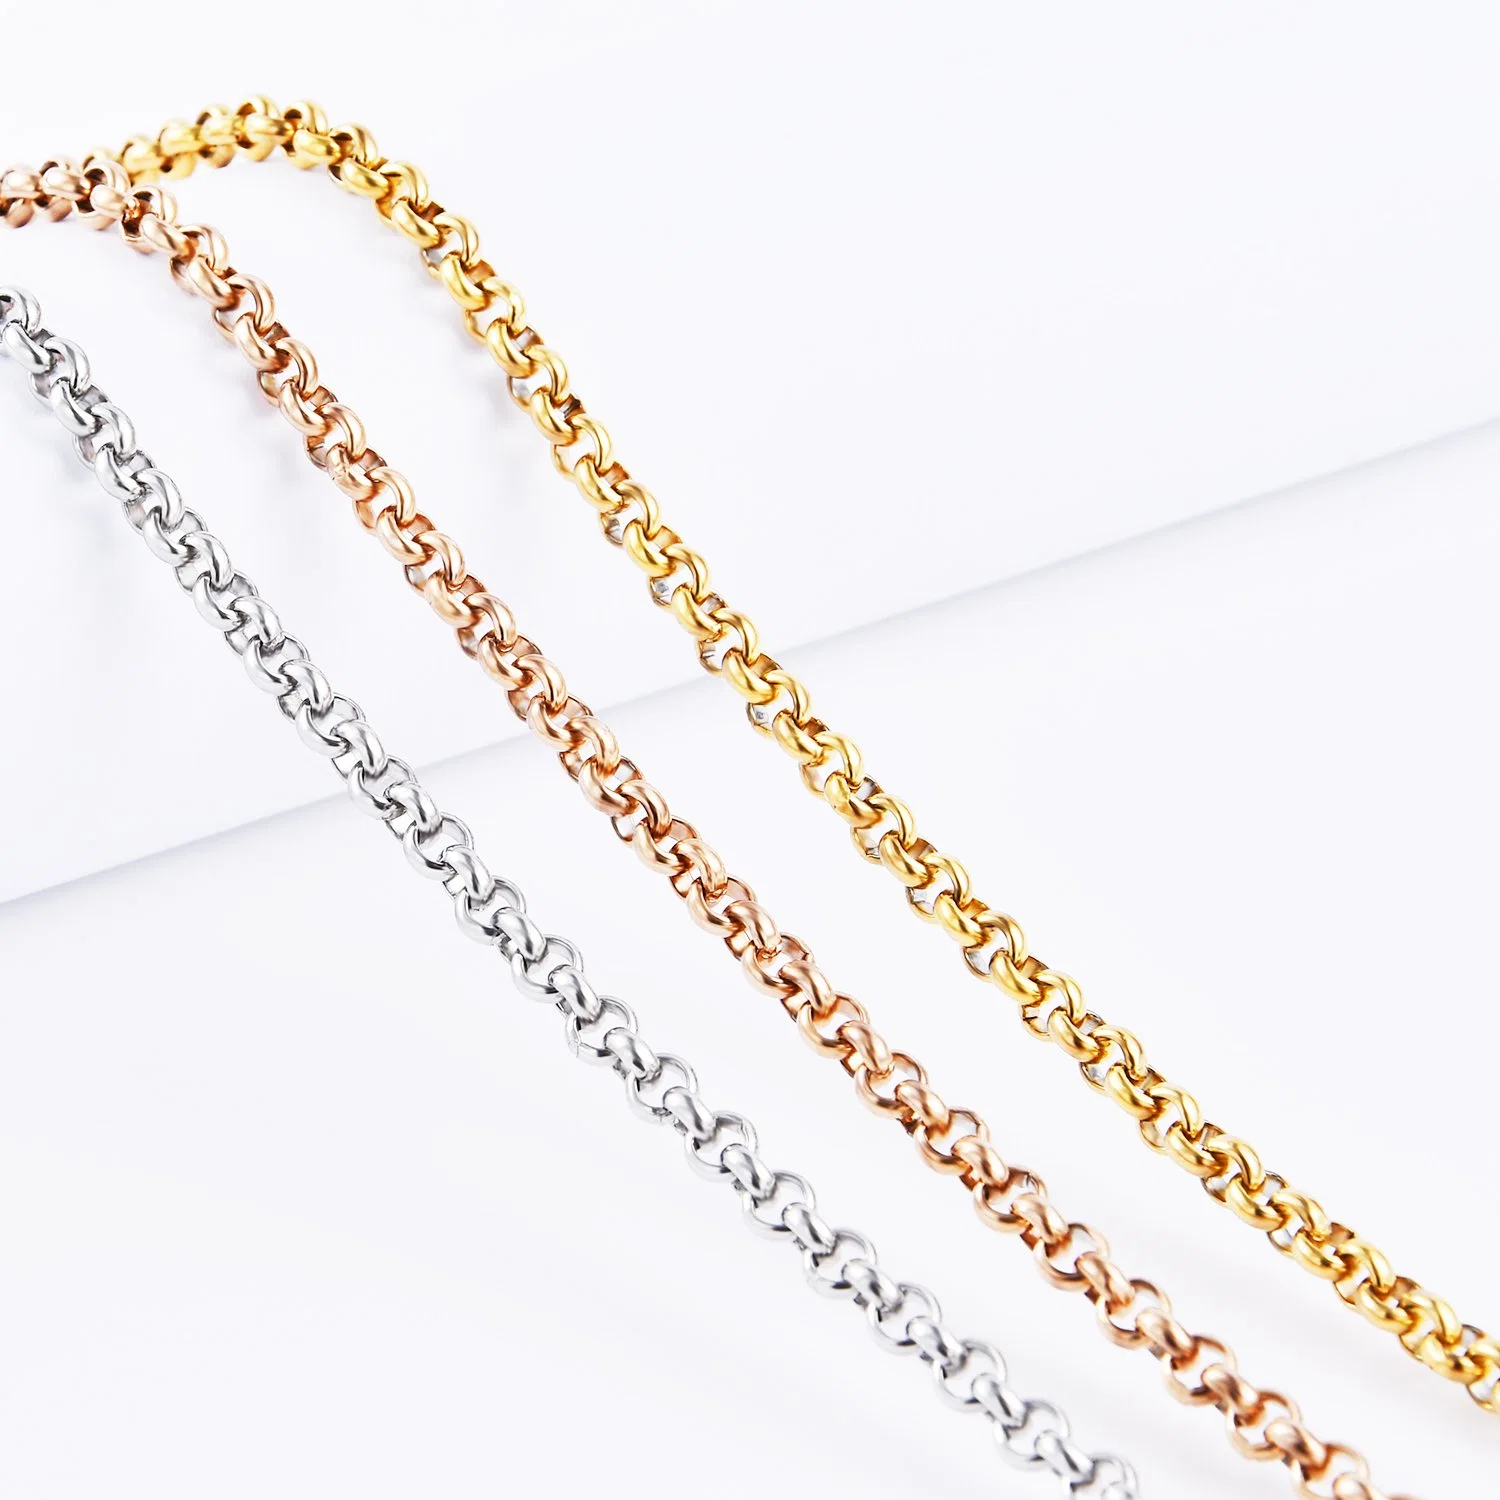 18inch Gold Plated Belcher Rolo Neck Chain Fashion Jewel Women Accessories Necklace for Pendant Jewelry Design